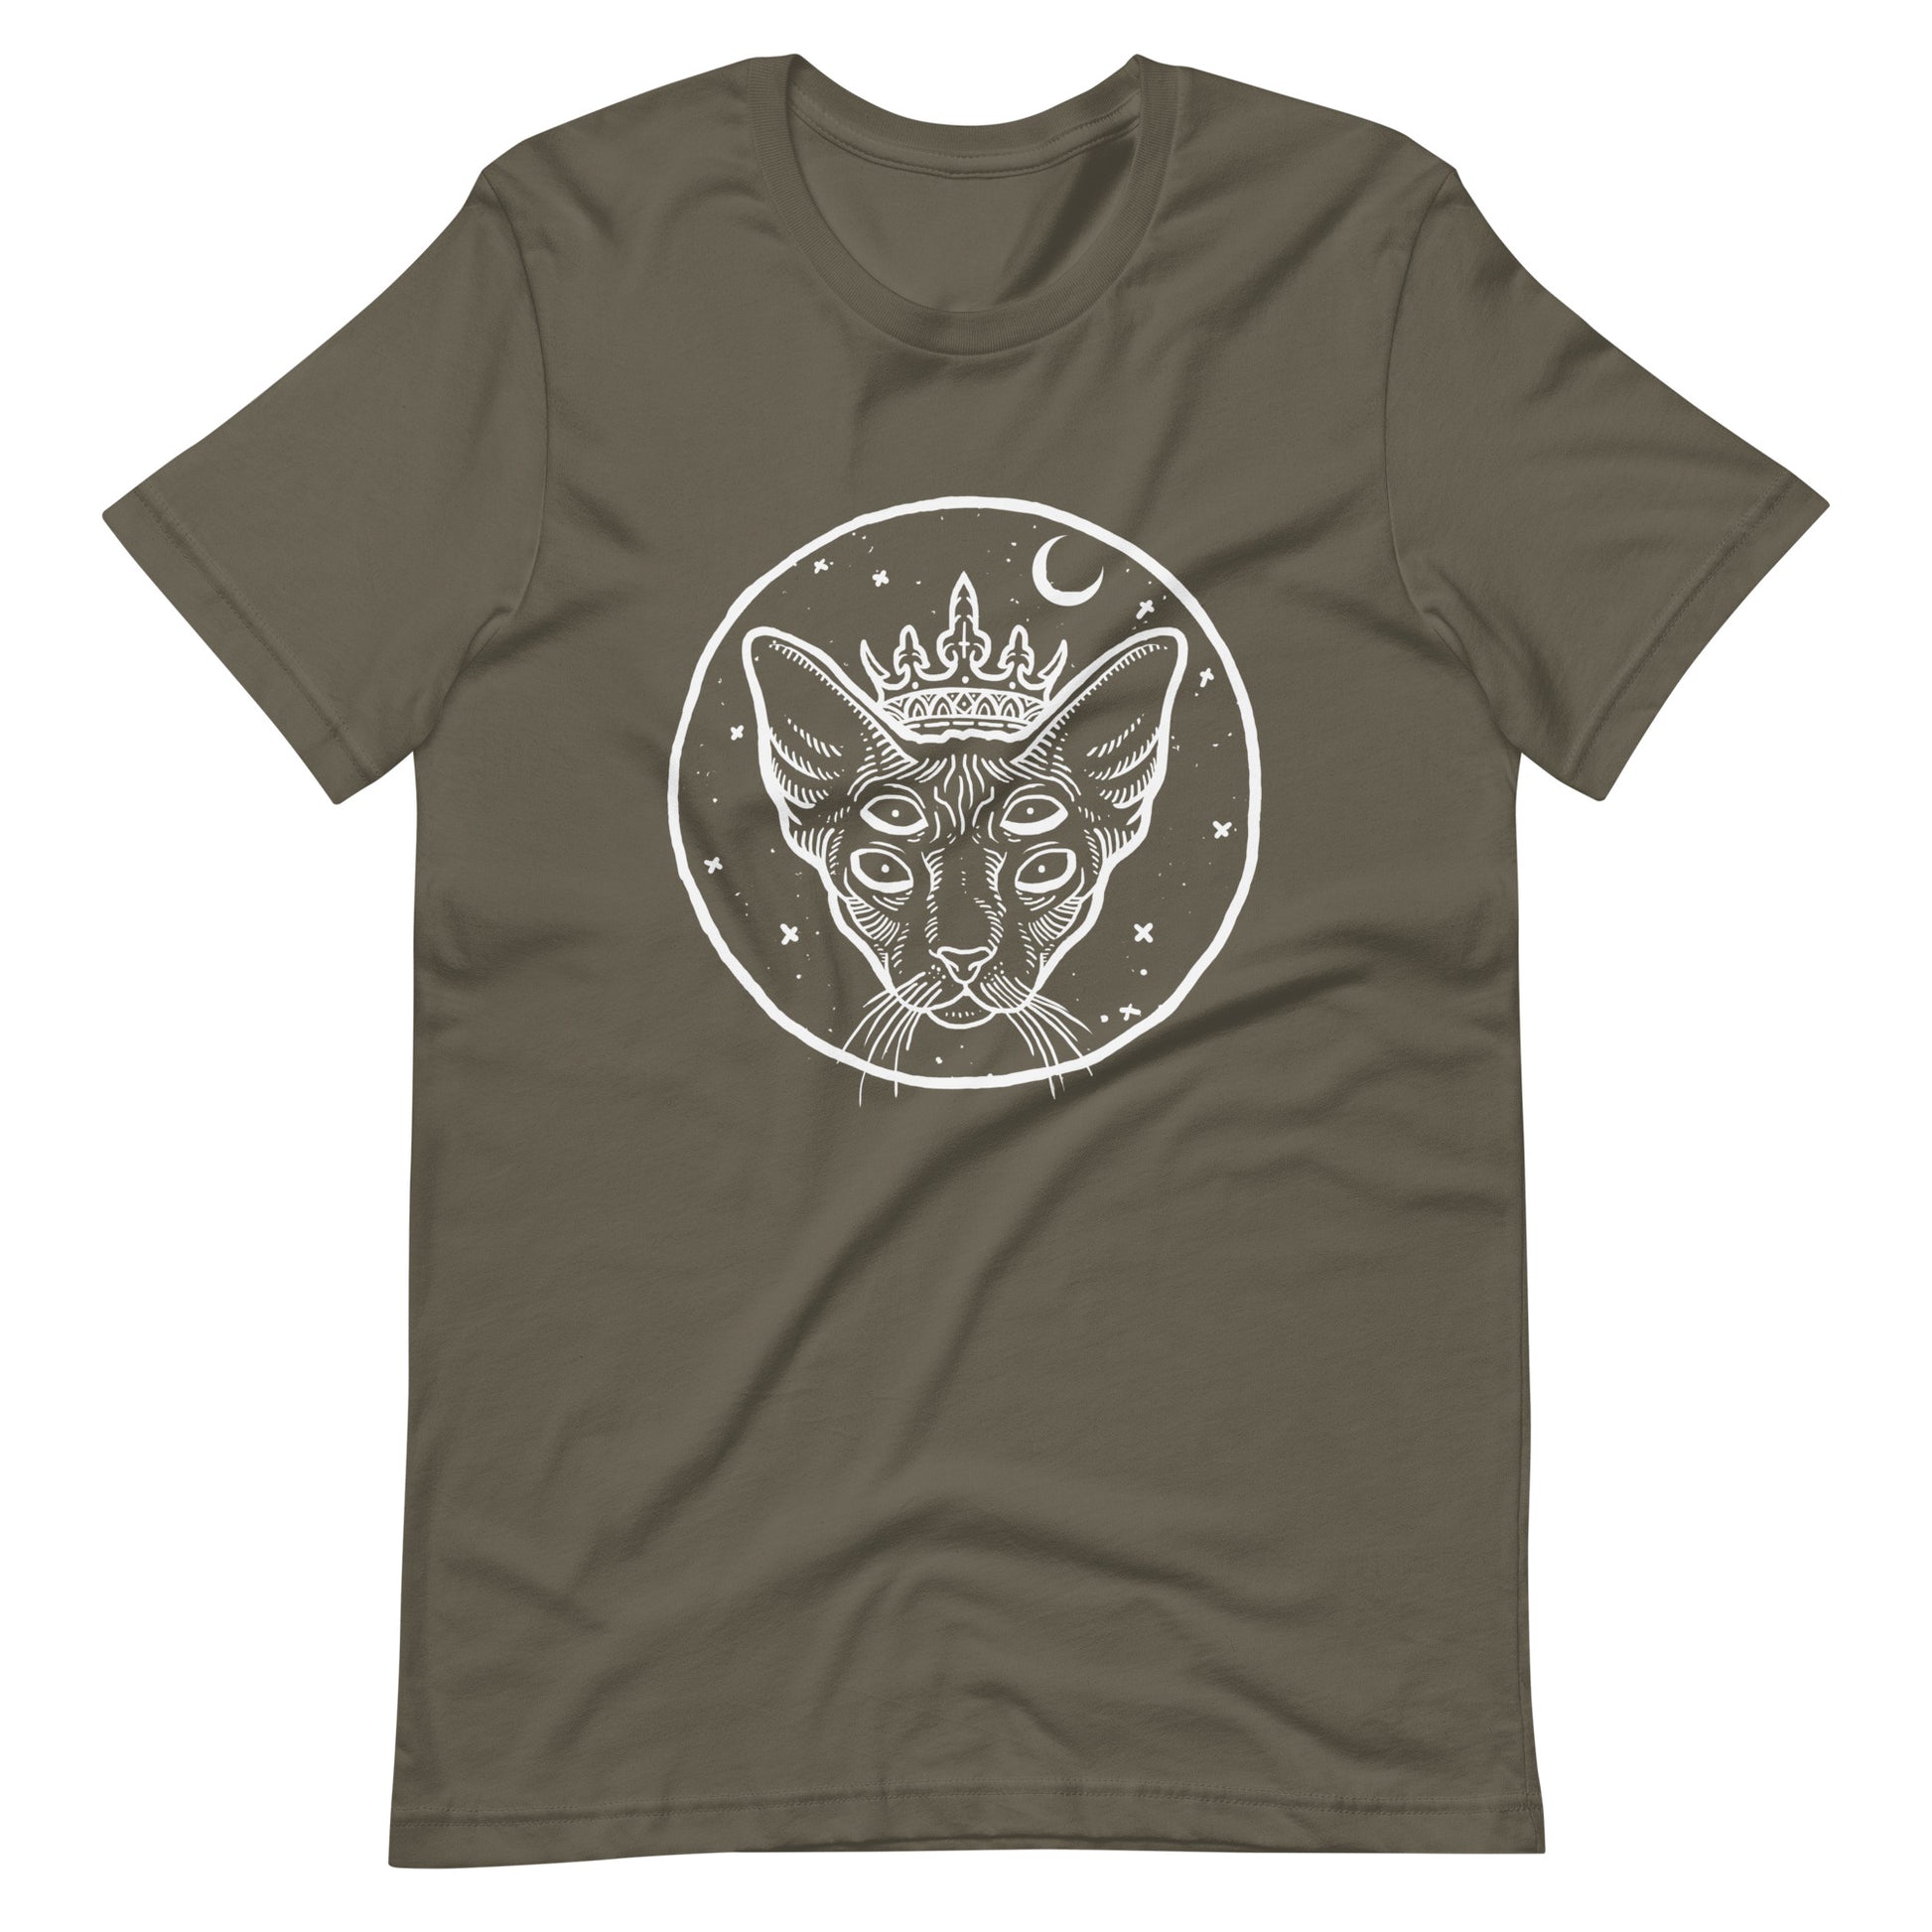 The Ruler - Men's t-shirt - Army Front